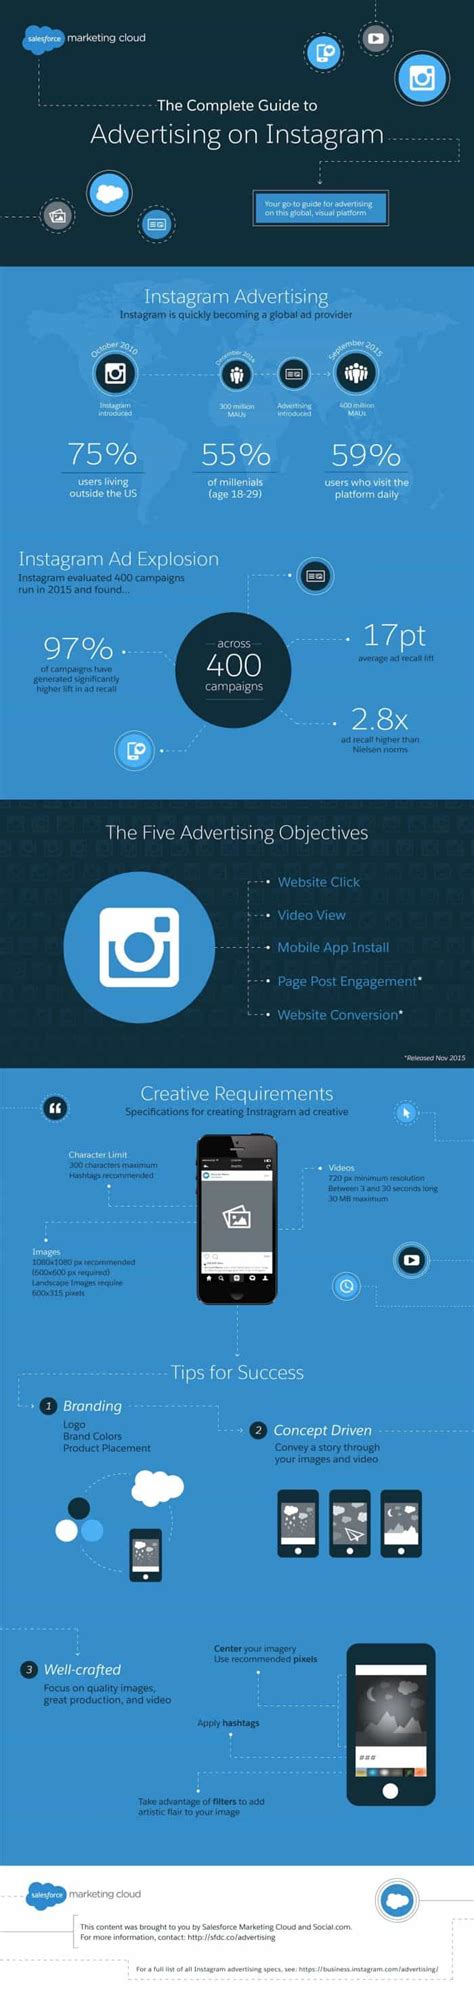 The Complete Guide To Advertising On Instagram Daily